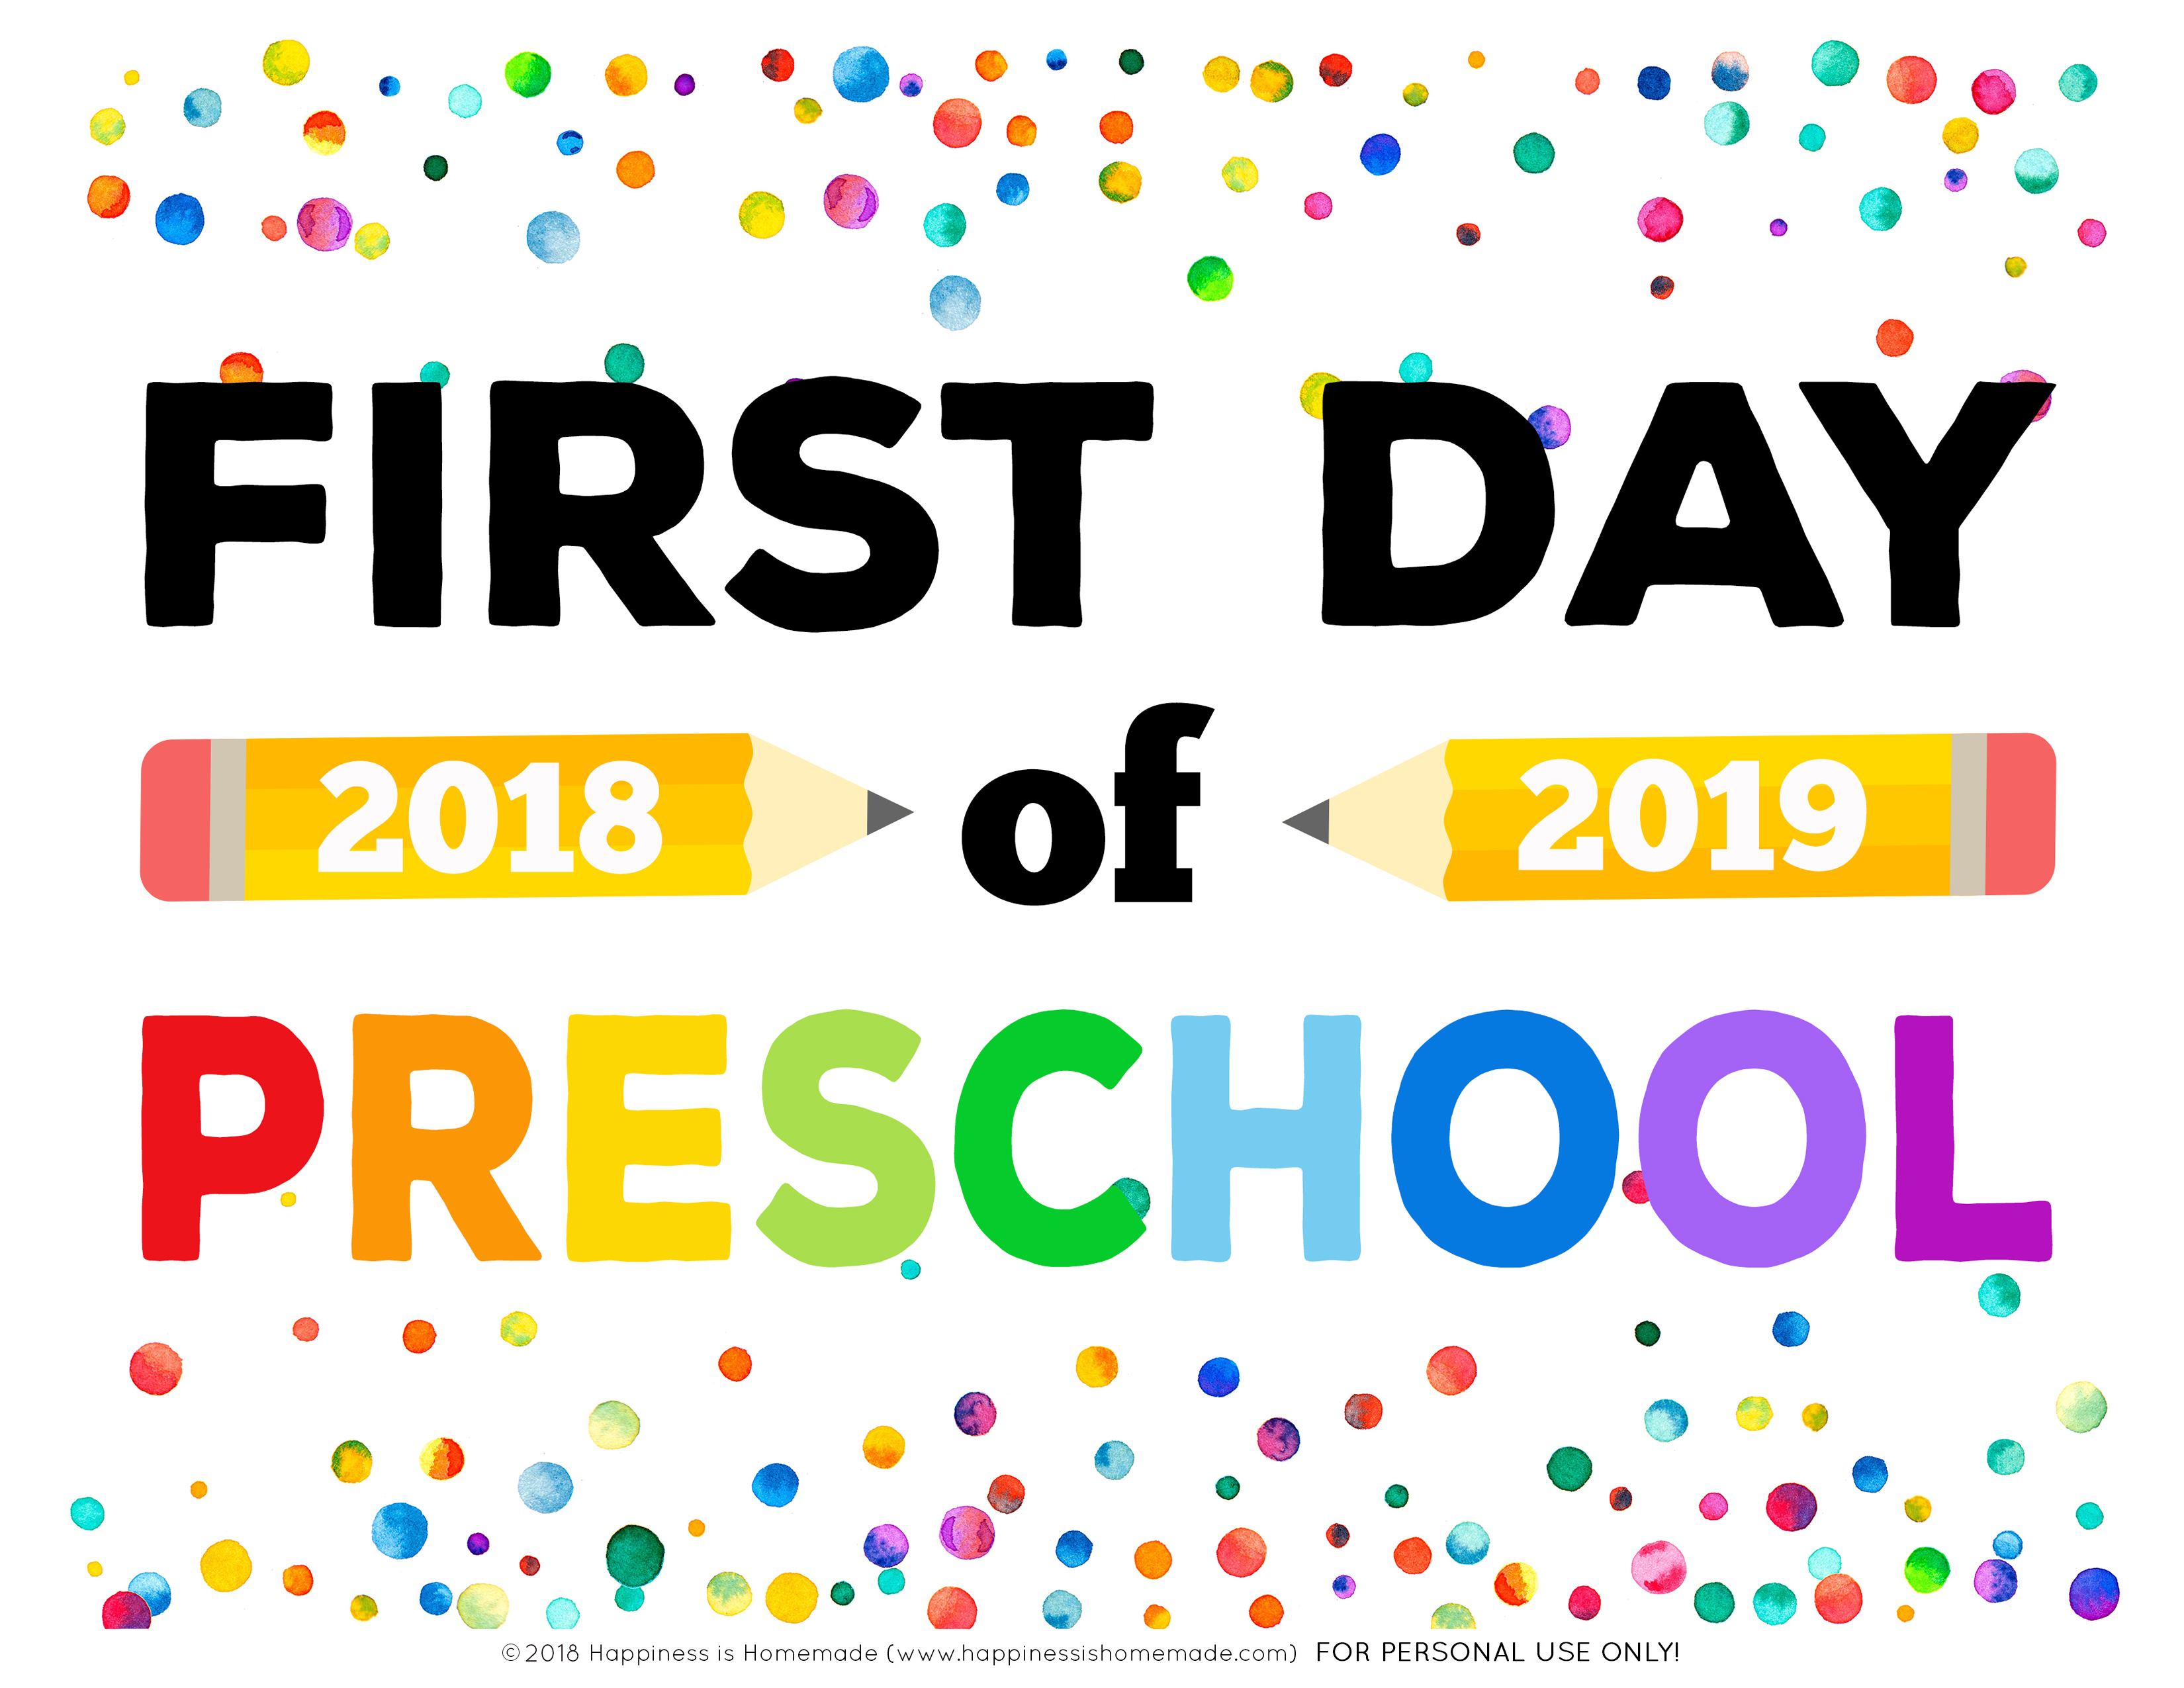 First Day Of School Signs - Free Printables - Happiness Is Homemade - First Day Of School Printable Free